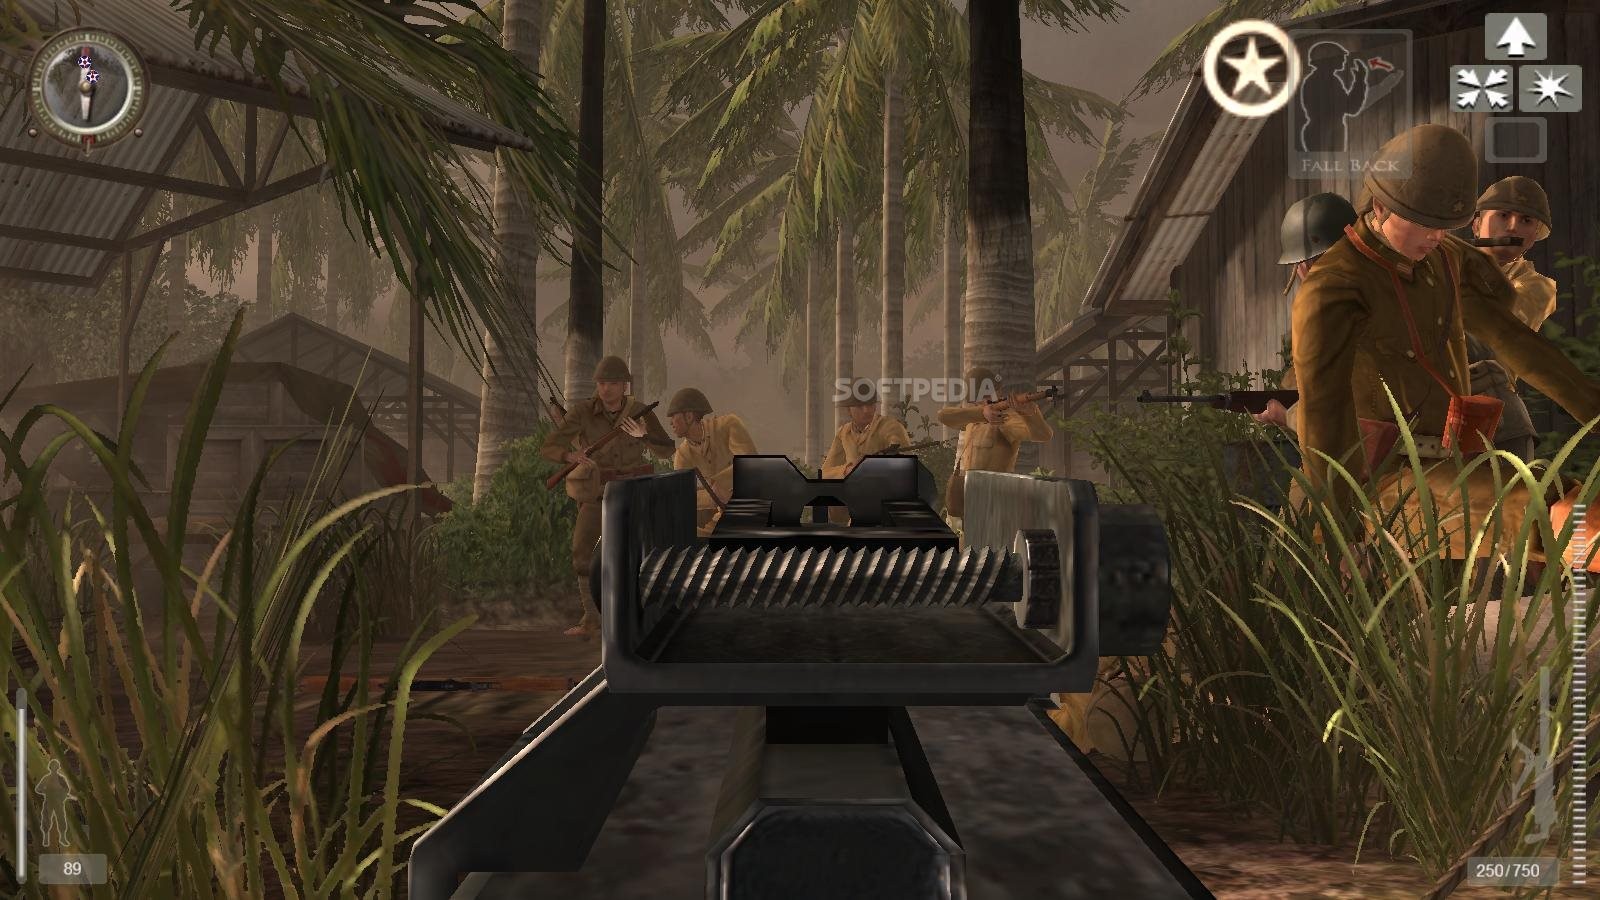 medal of honor pacific assault mods pc